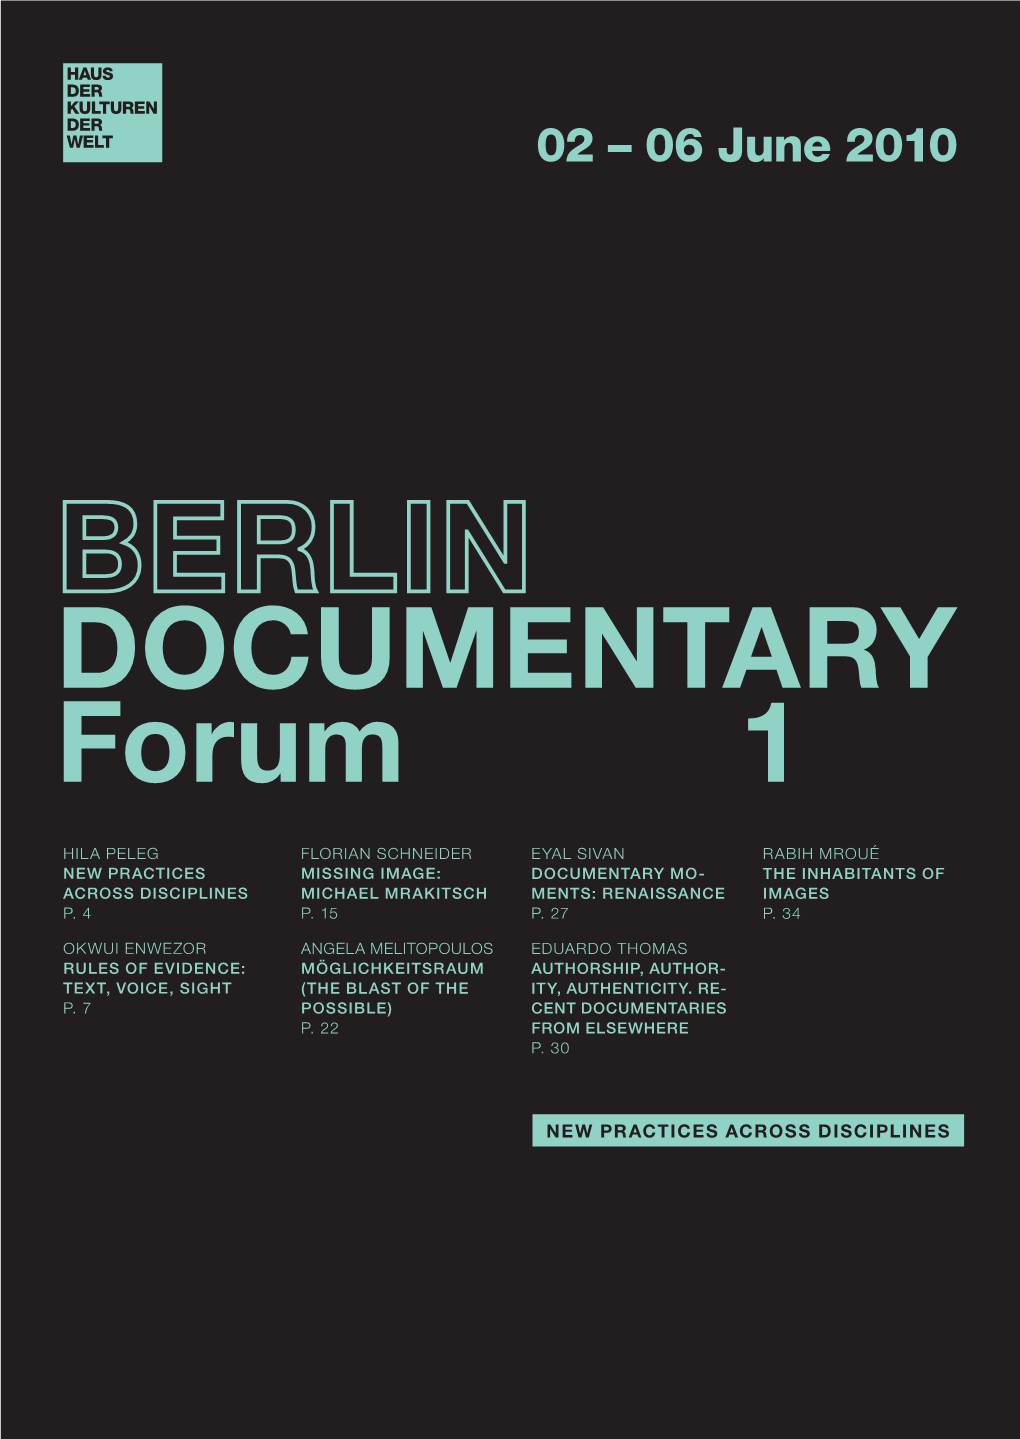 DOCUMENTARY FORUM 1 Is Things One After the Other